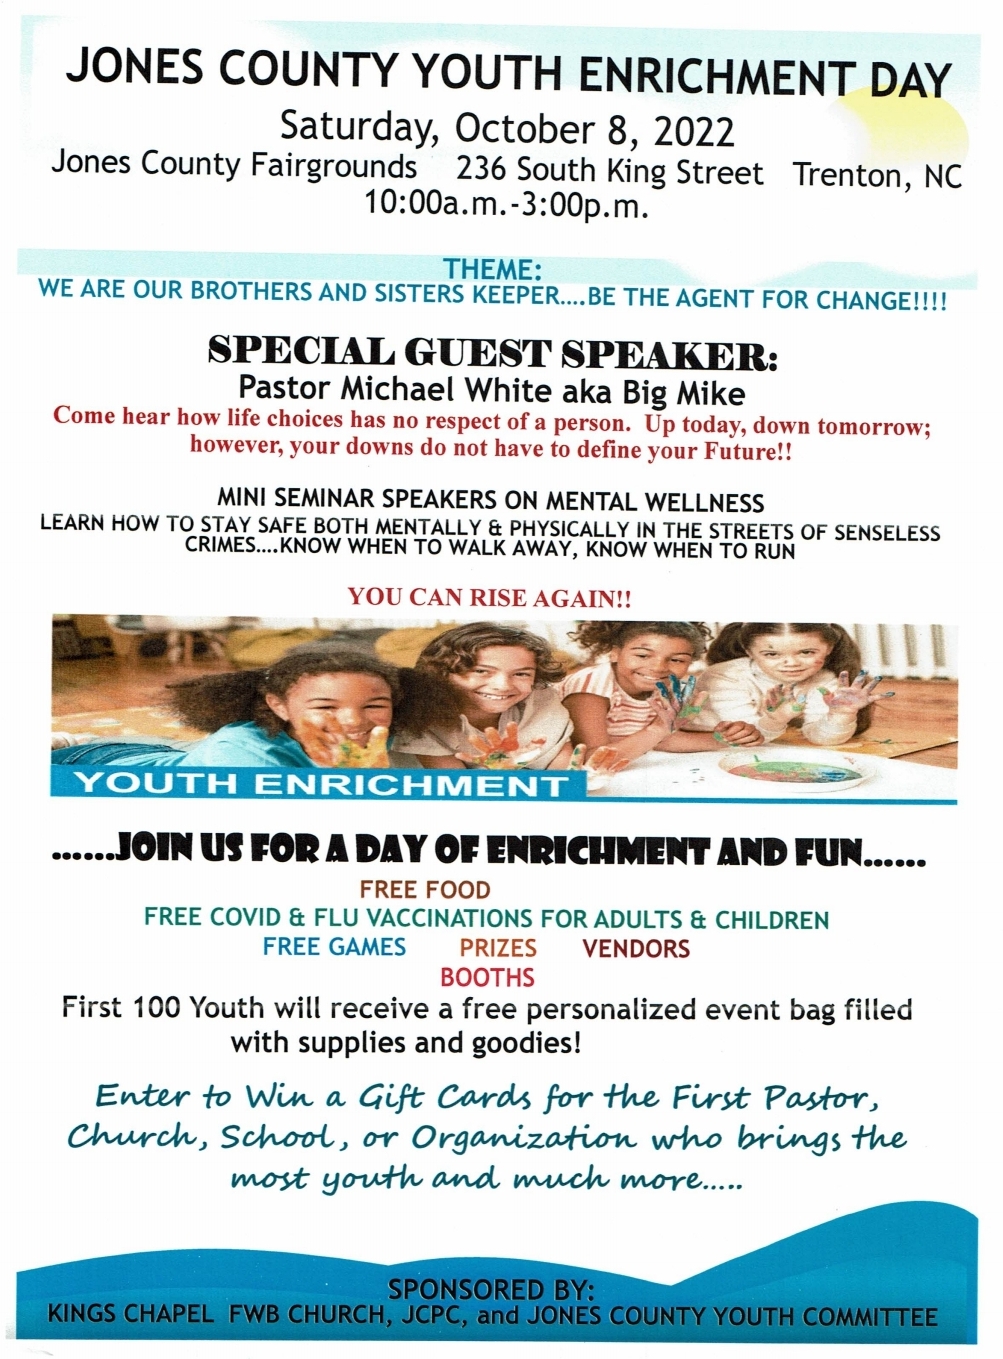 JONES COUNTY YOUTH ENRICHMENT DAY